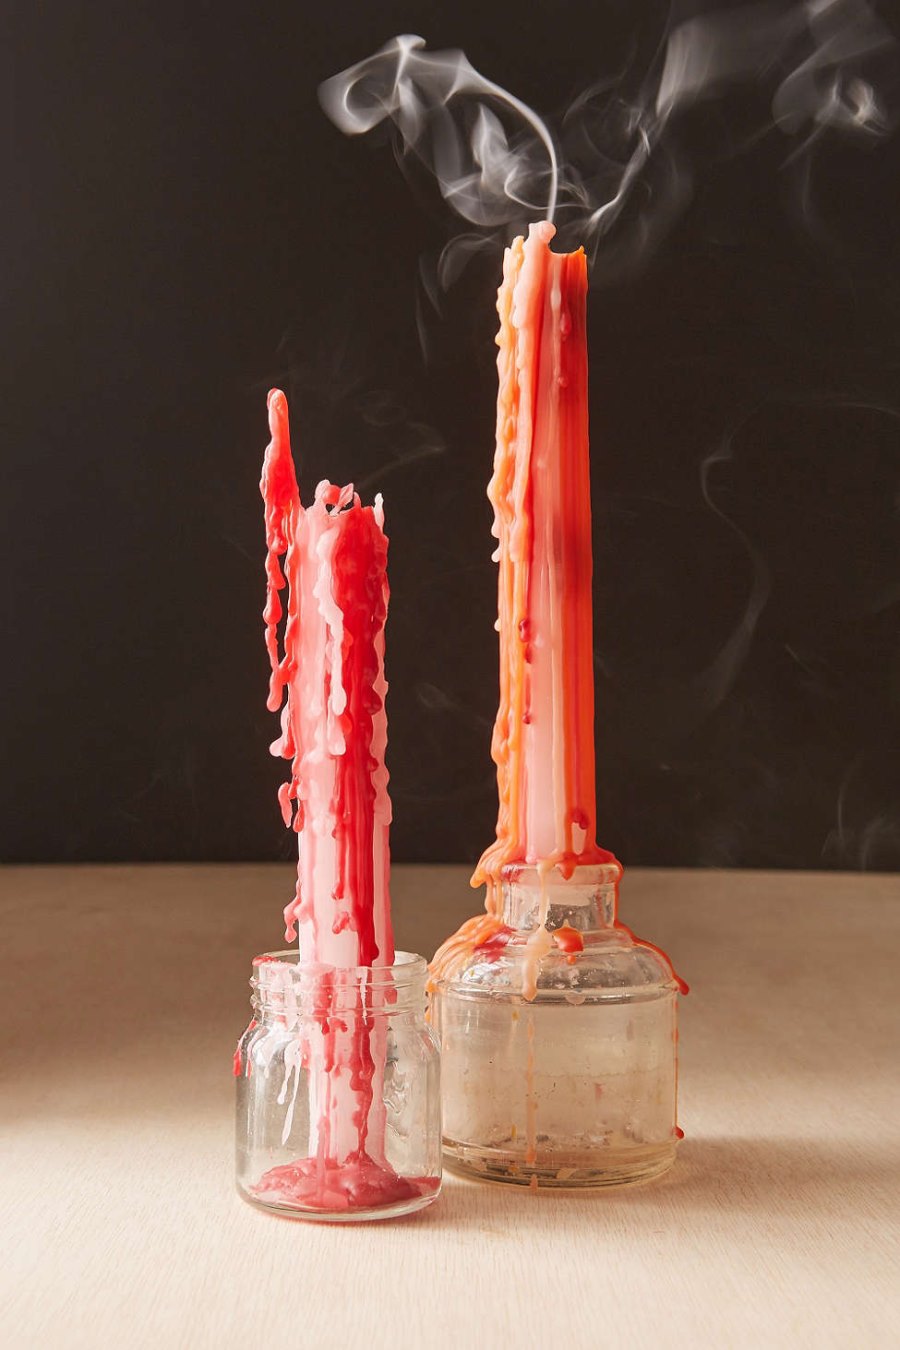 Halloween candles from Urban Outfitters